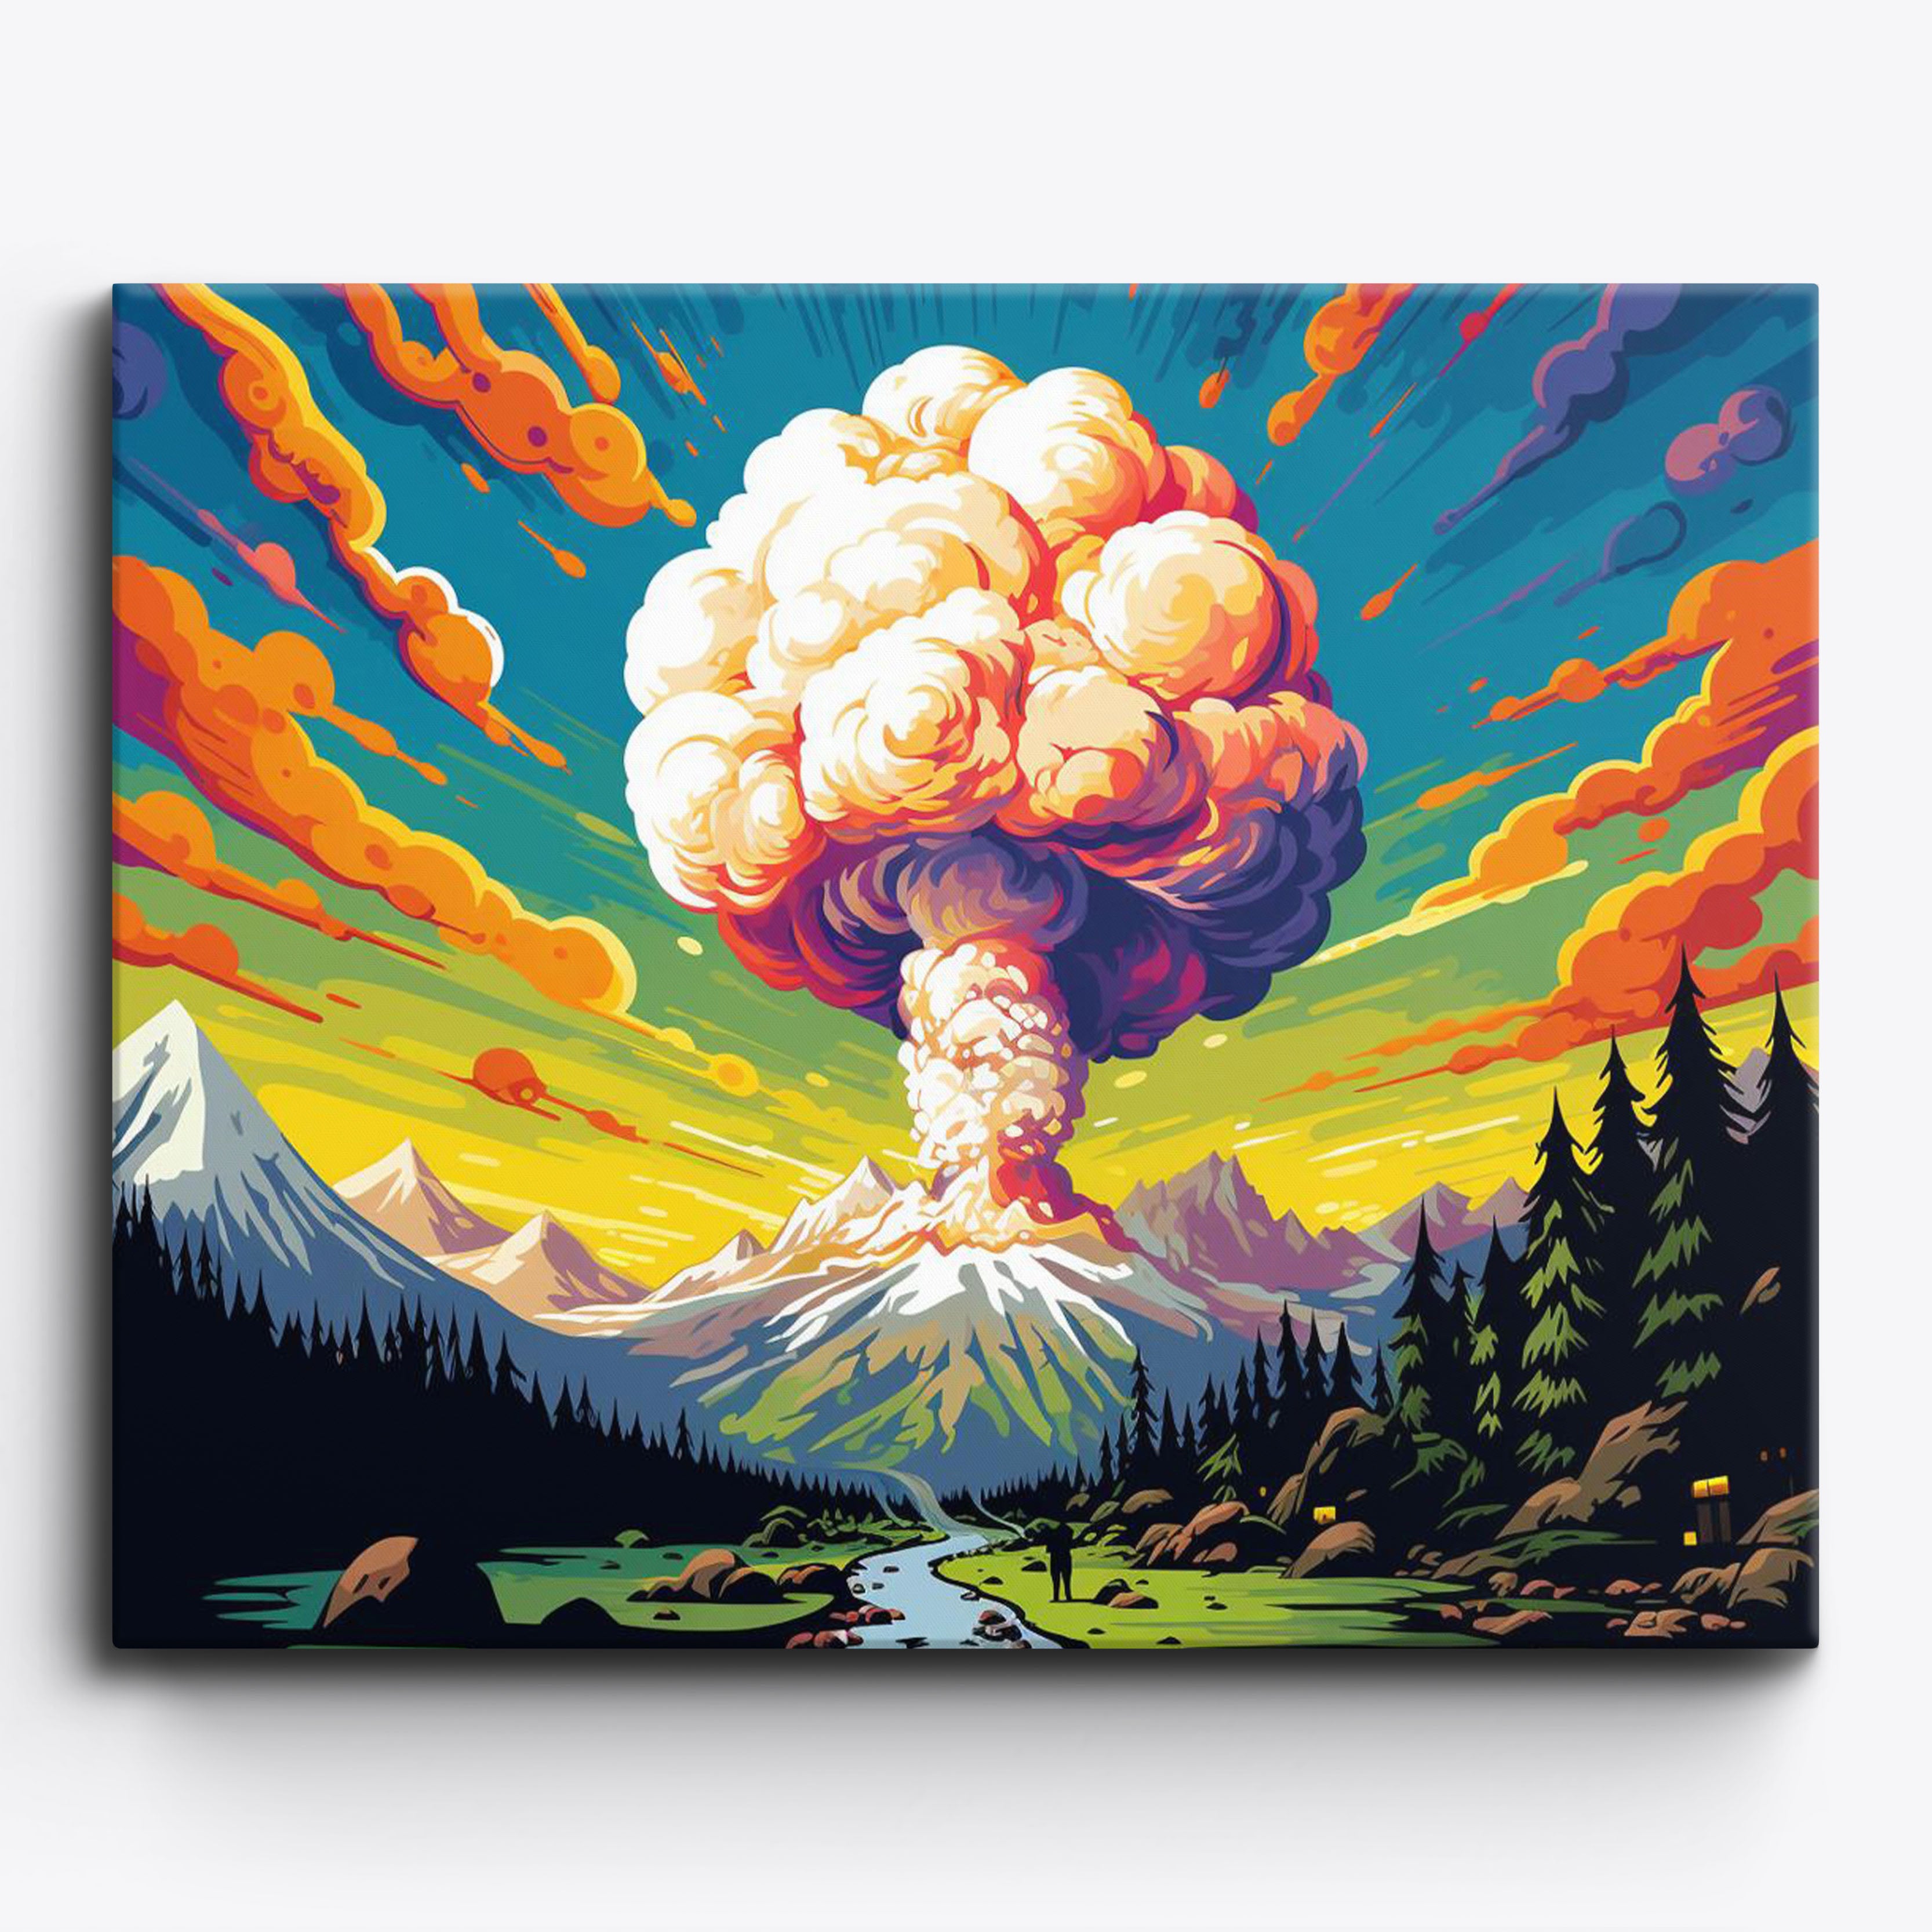 Nuclear Volcano No Frame